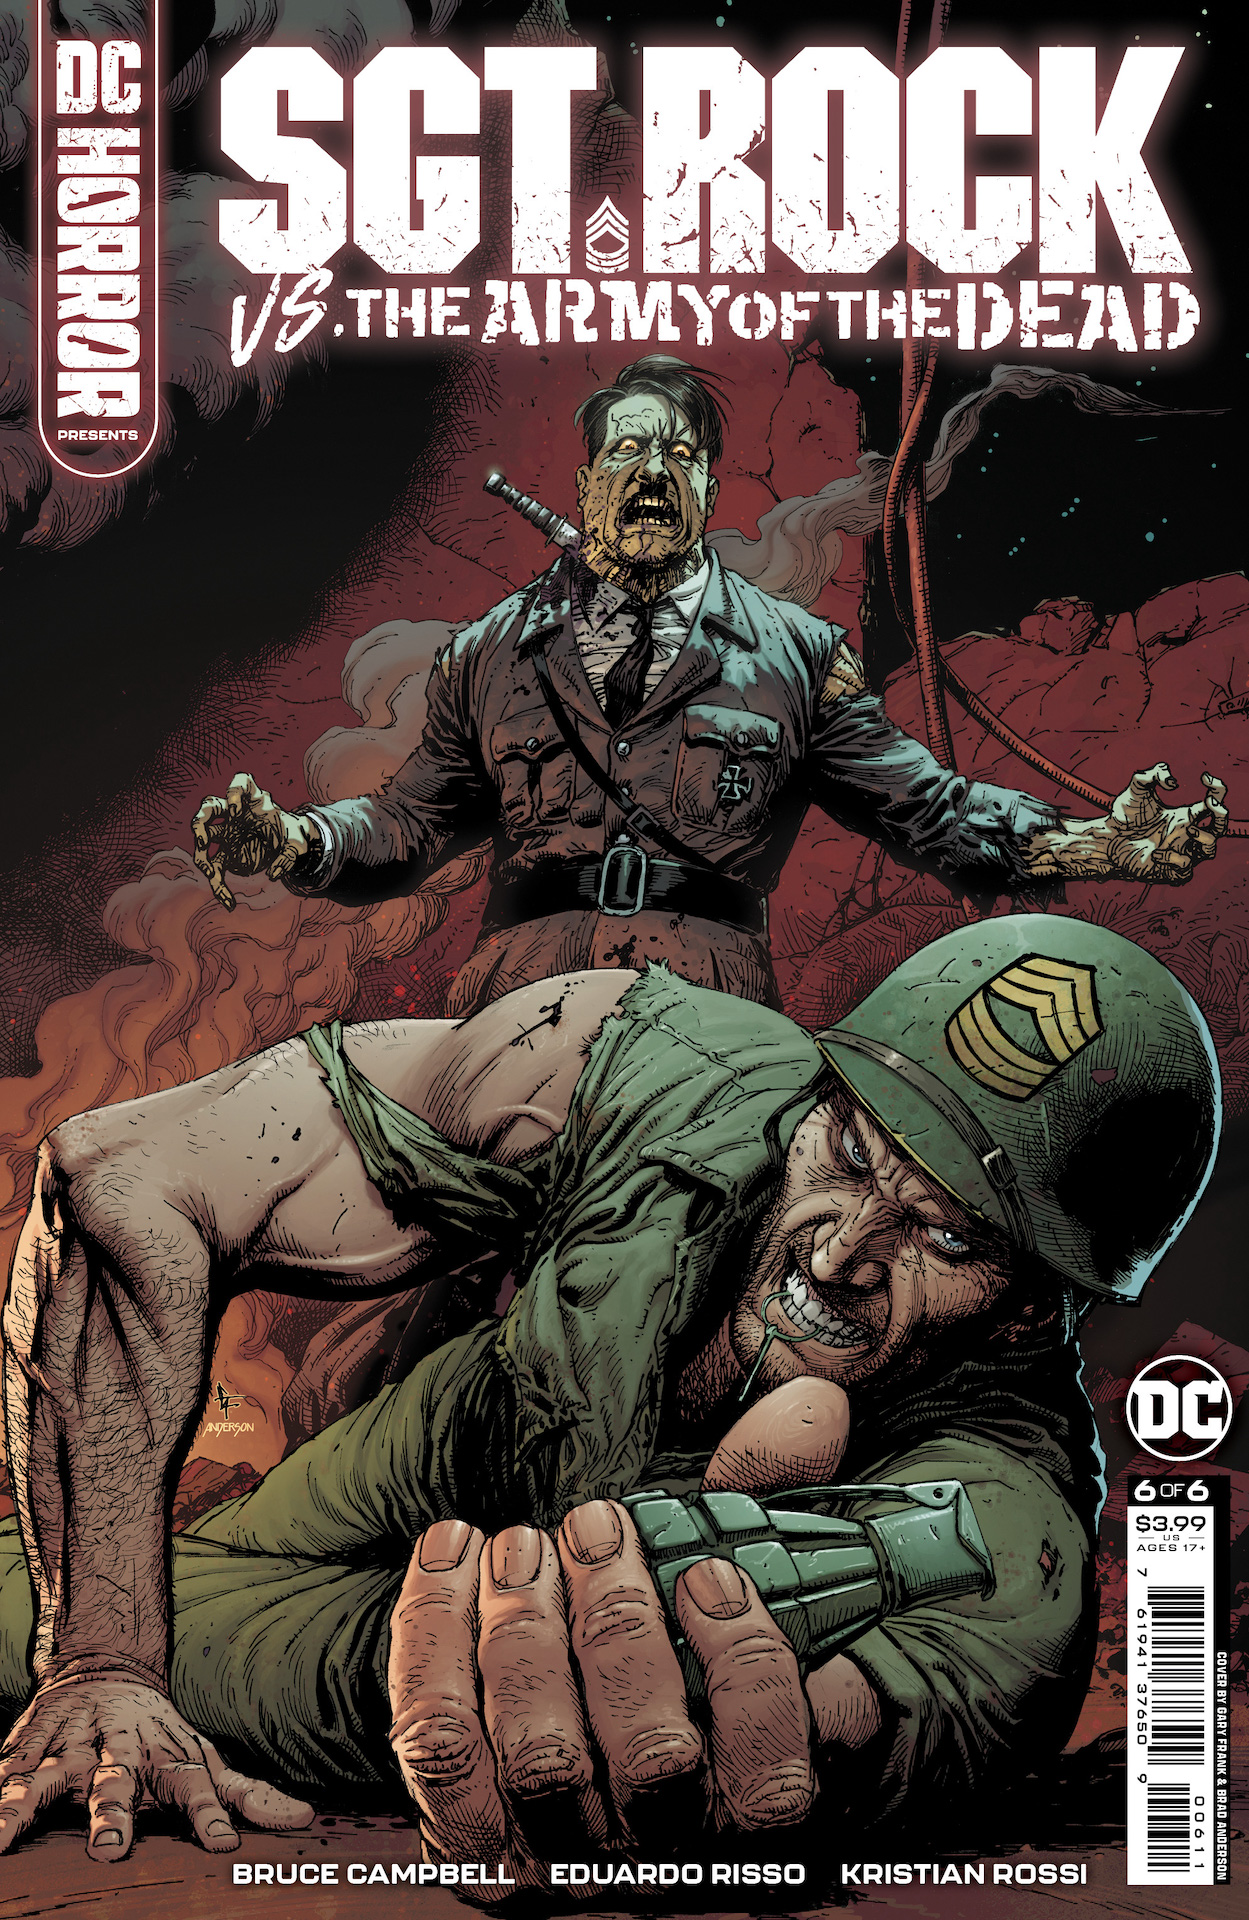 DC Preview: DC Horror Presents: Sgt. Rock vs. The Army of the Dead #6